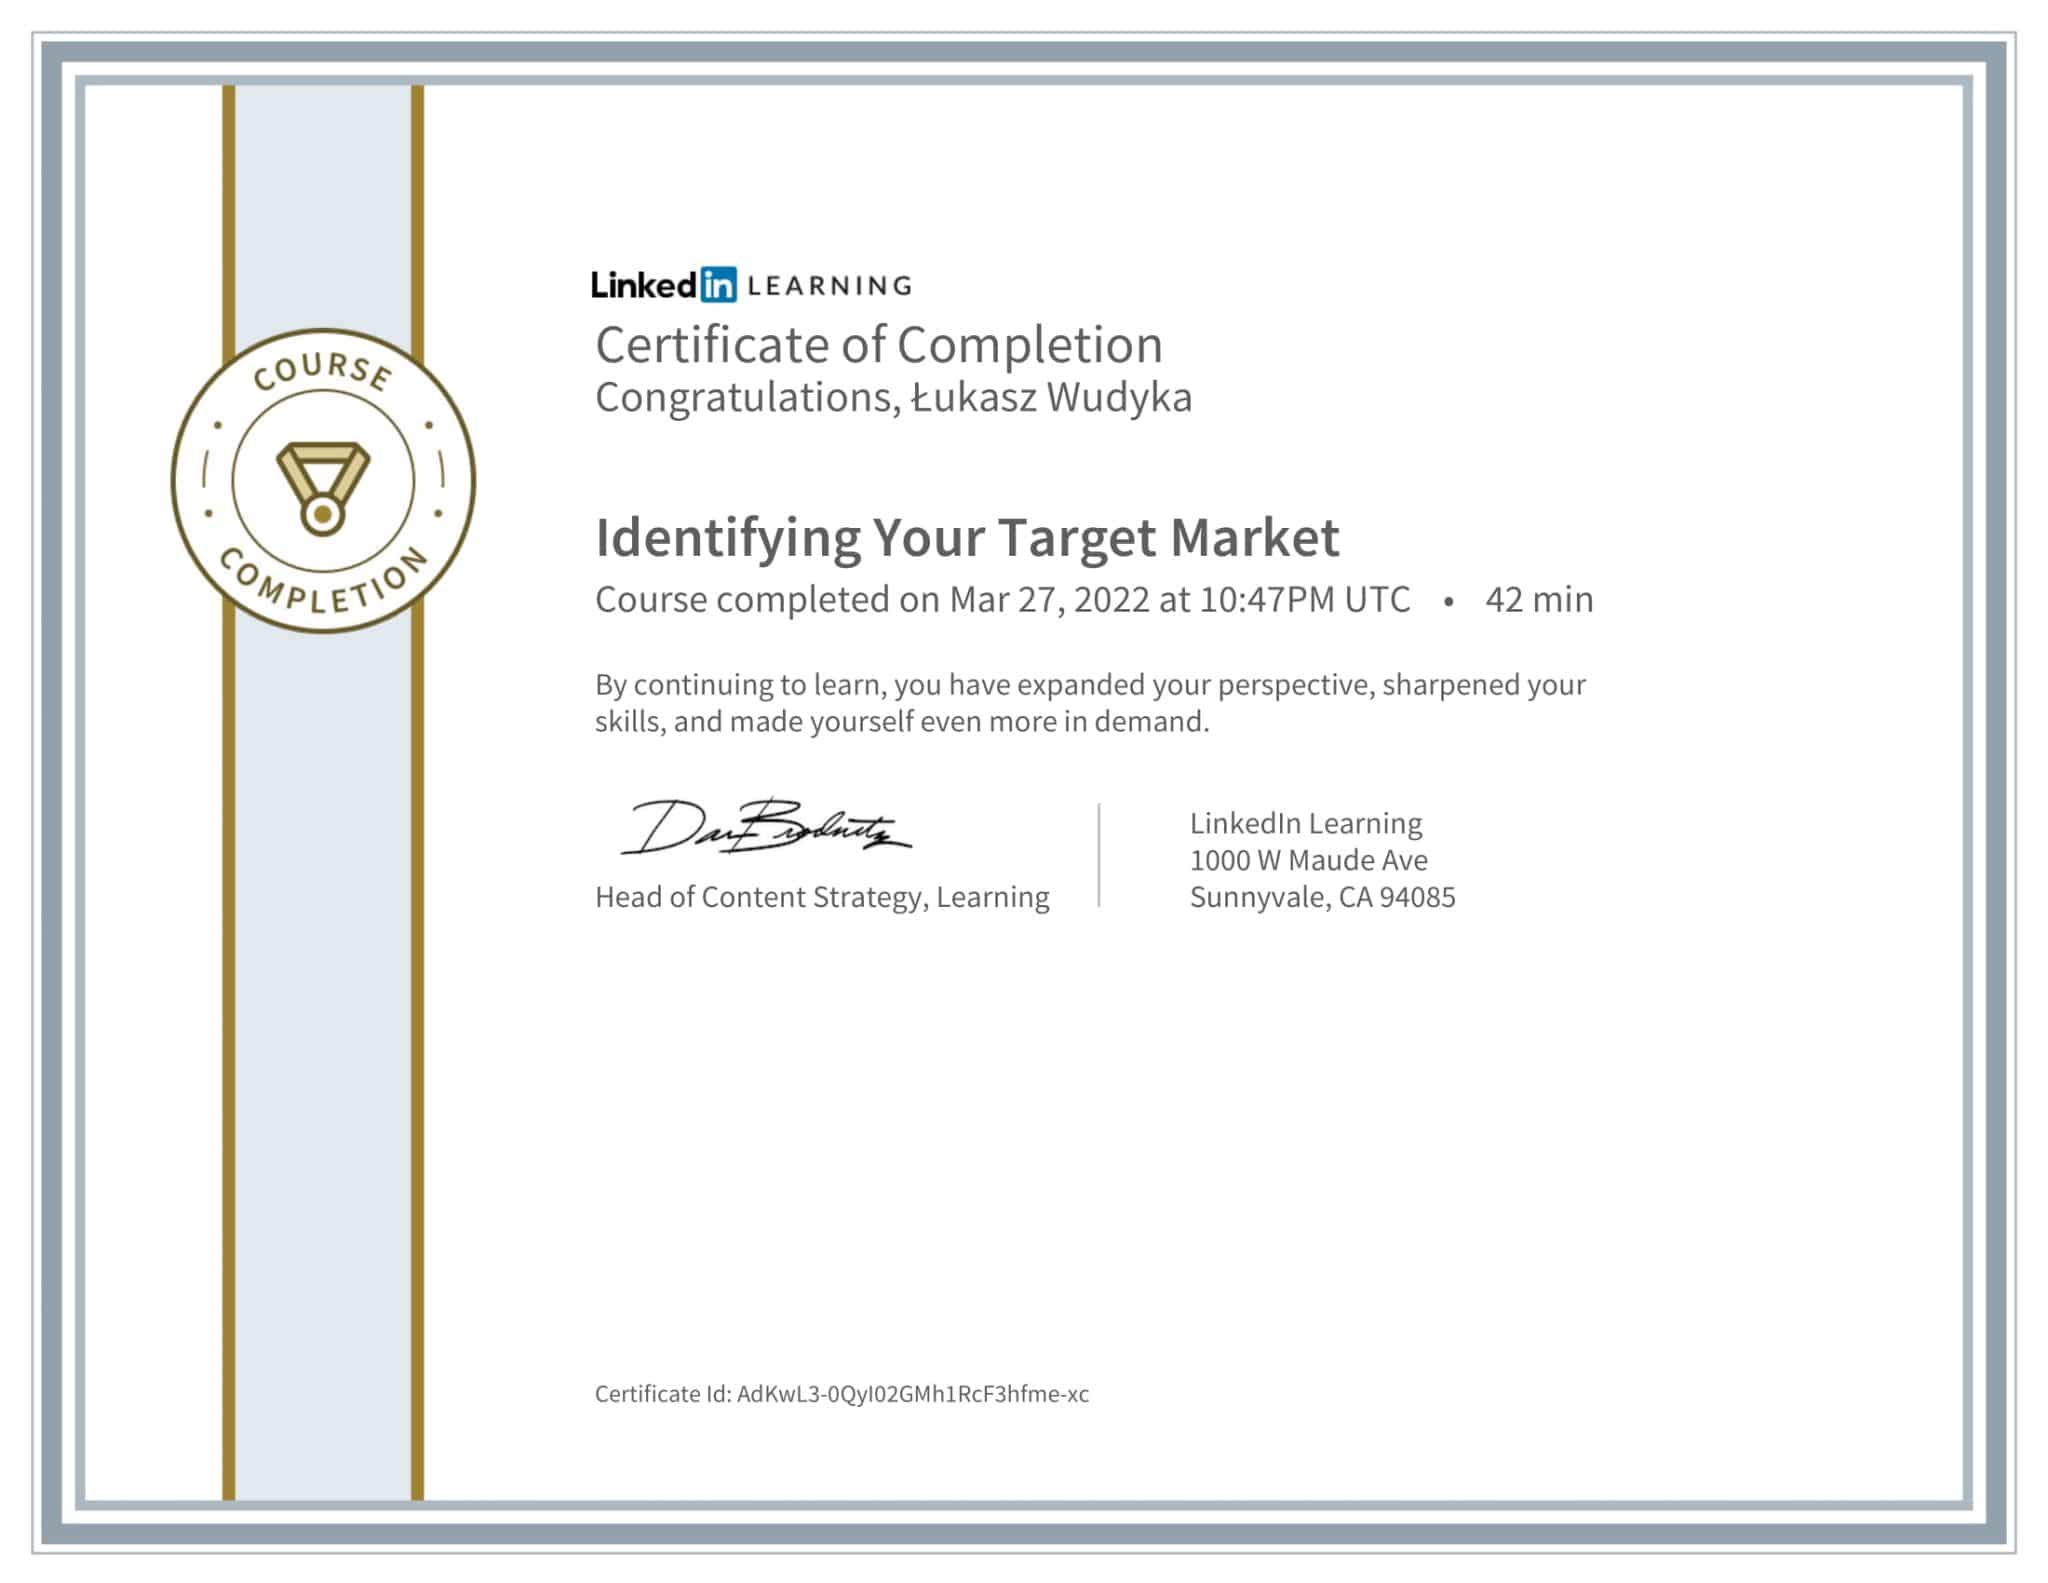 CertificateOfCompletion_Identifying Your Target Market-1